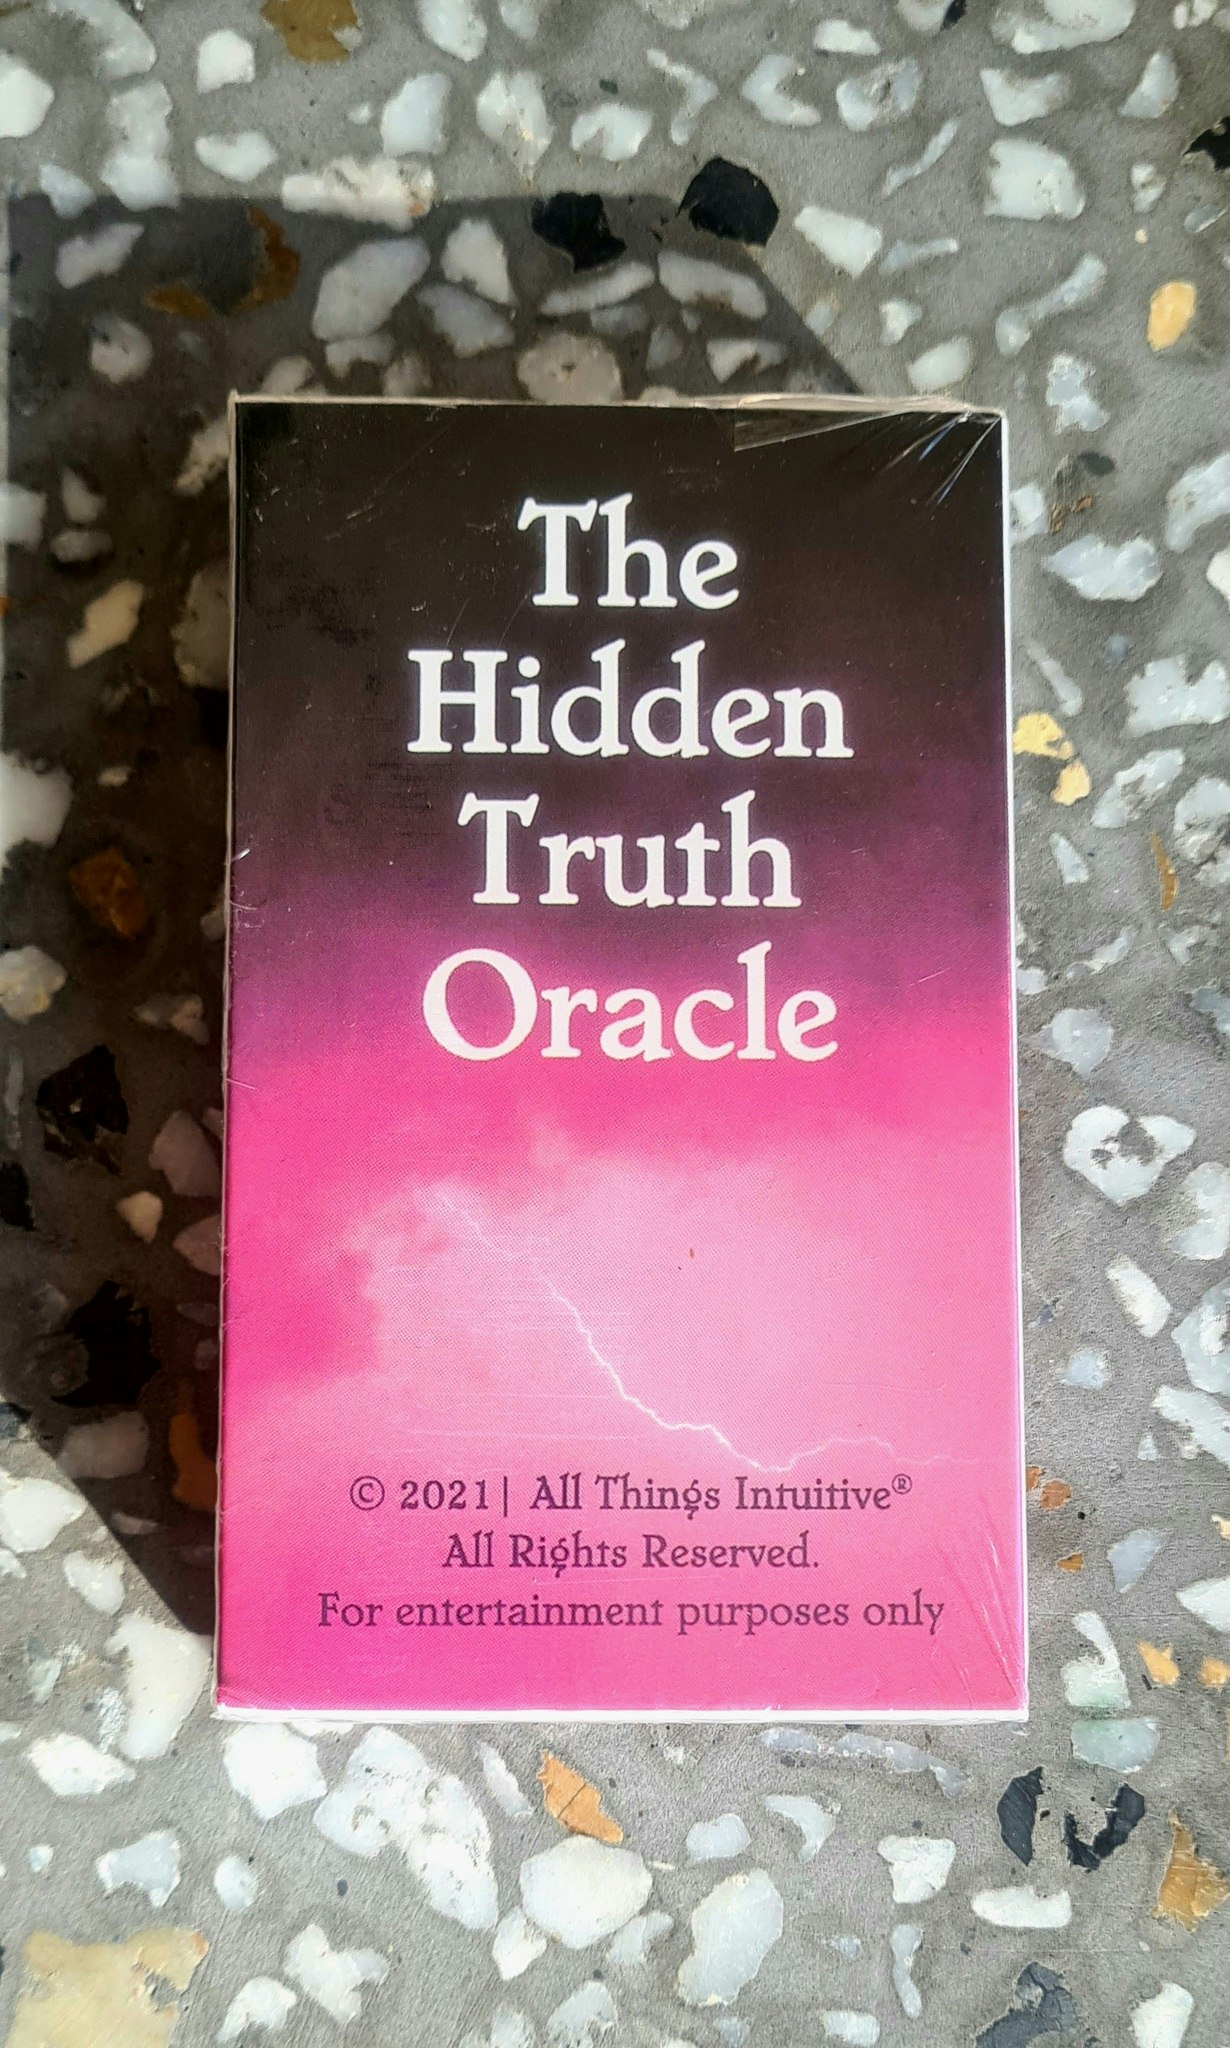 The hiden truth oracle